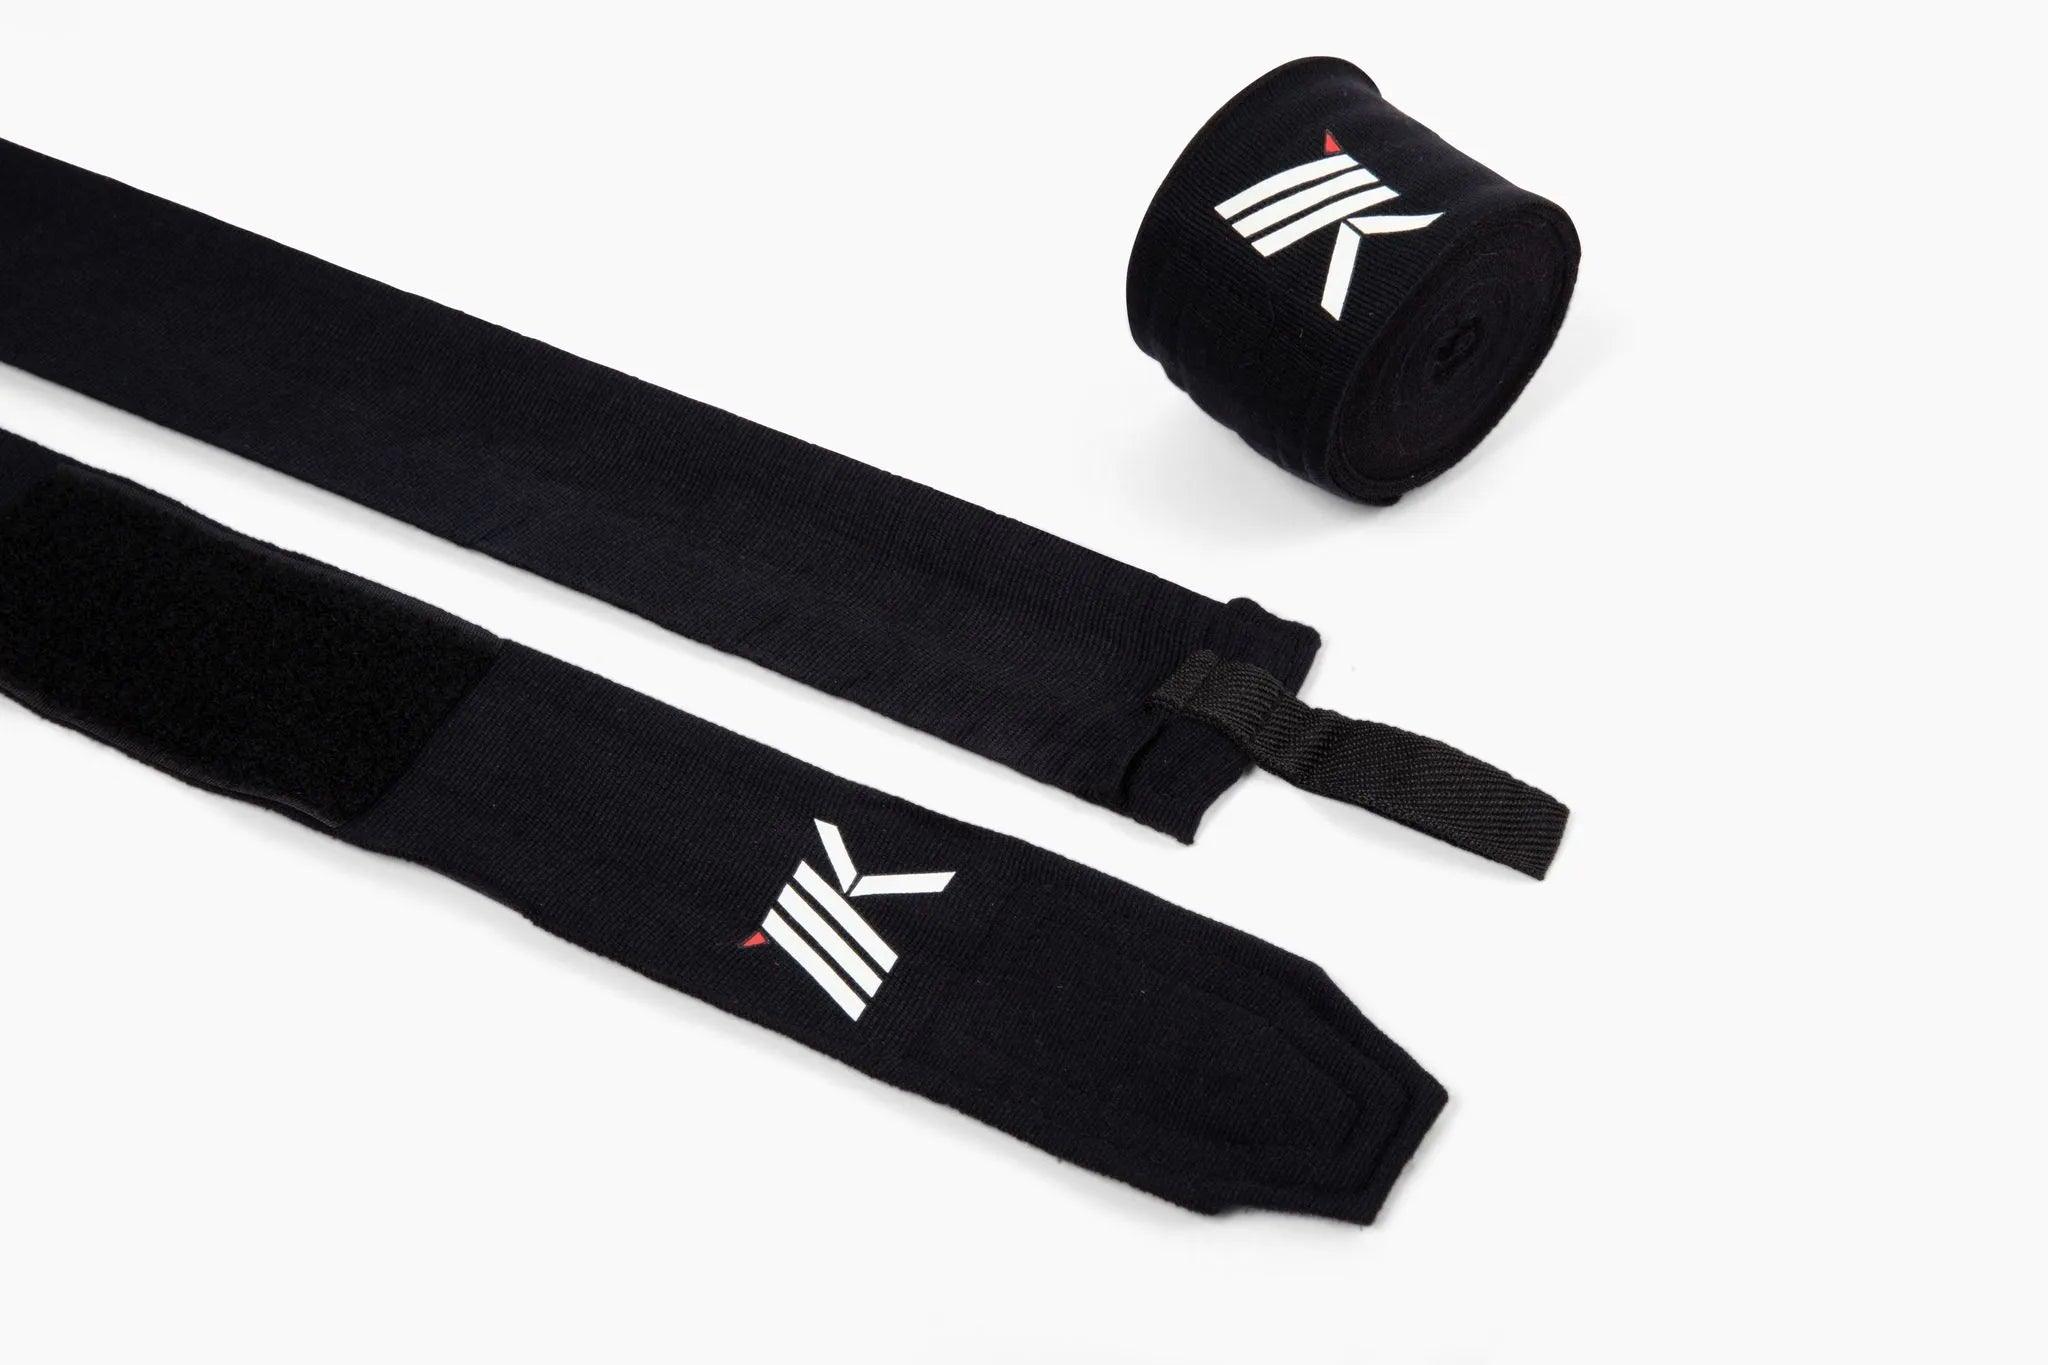 Black pair of 180-inch premium boxing hand wraps by MK1 highlighting their loop thumb closure and secure strap. 